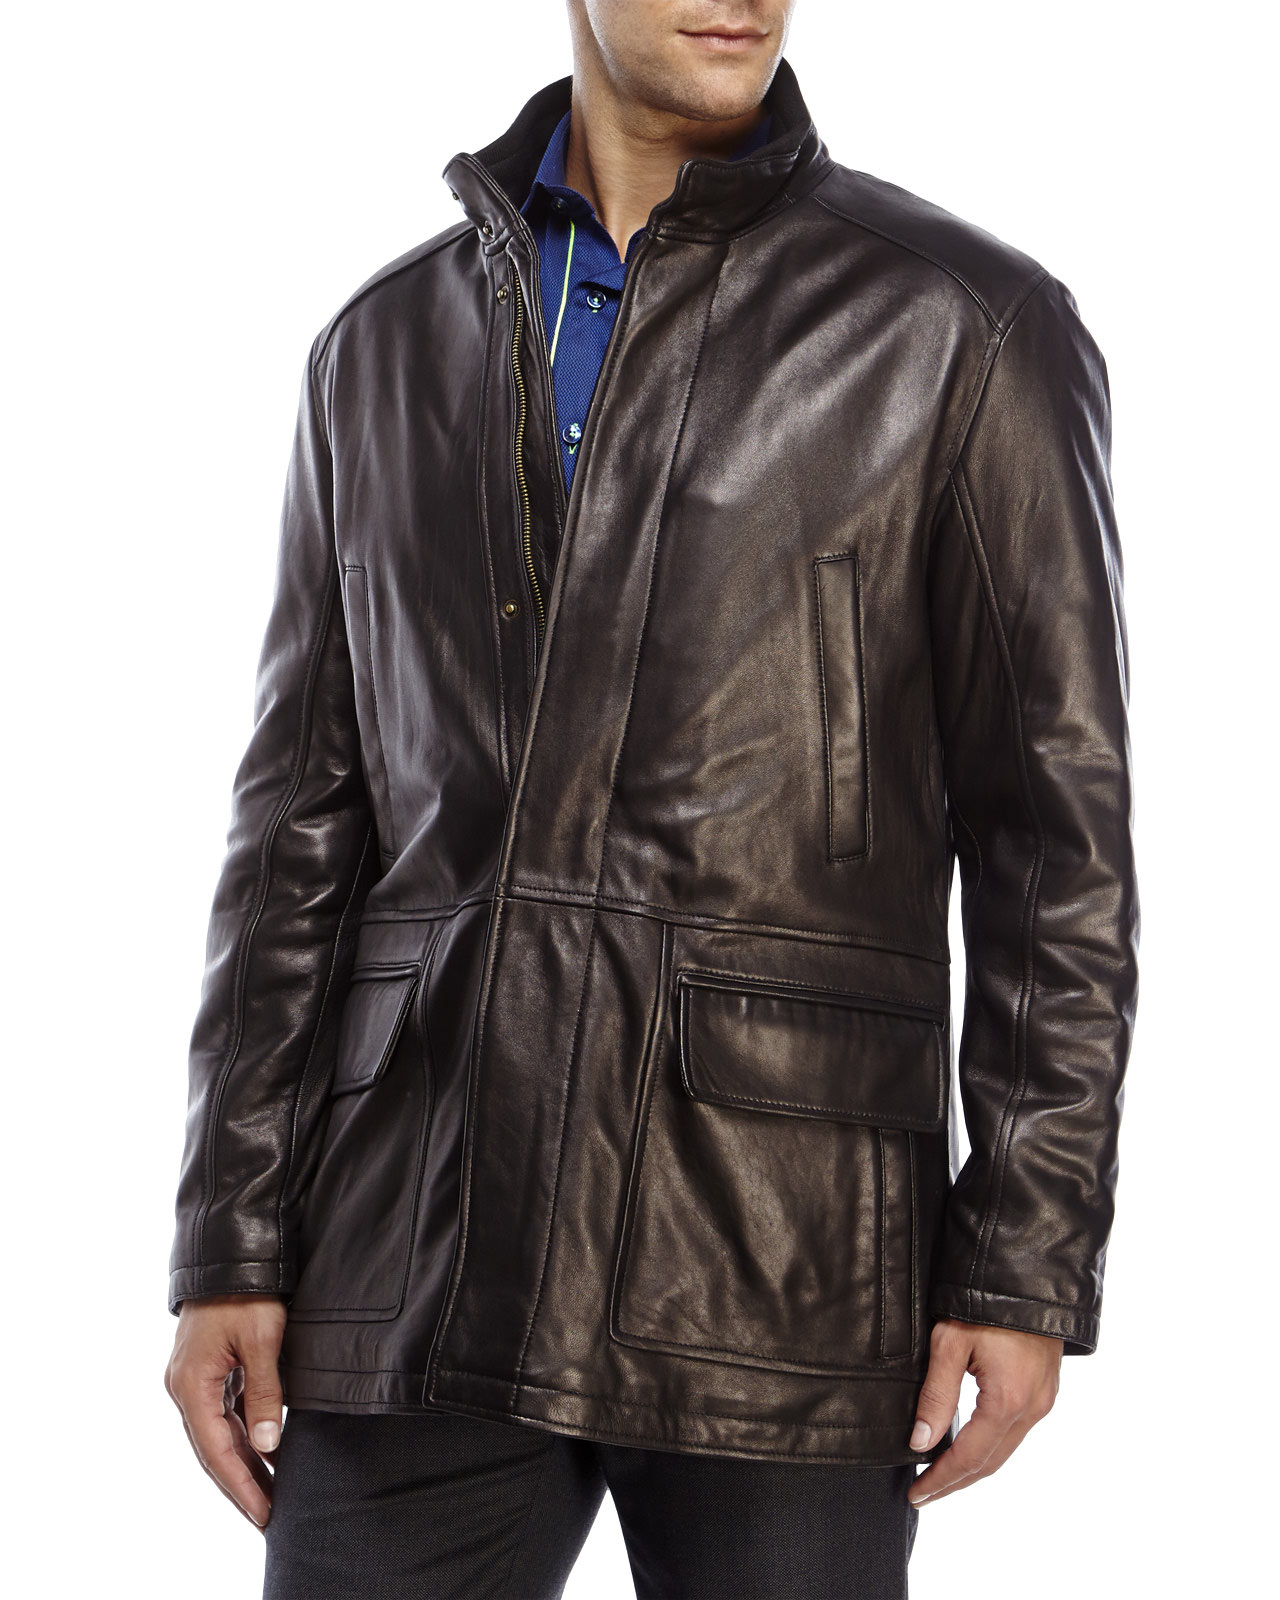 Lyst - Cole Haan Smooth Lamb Leather Jacket in Brown for Men